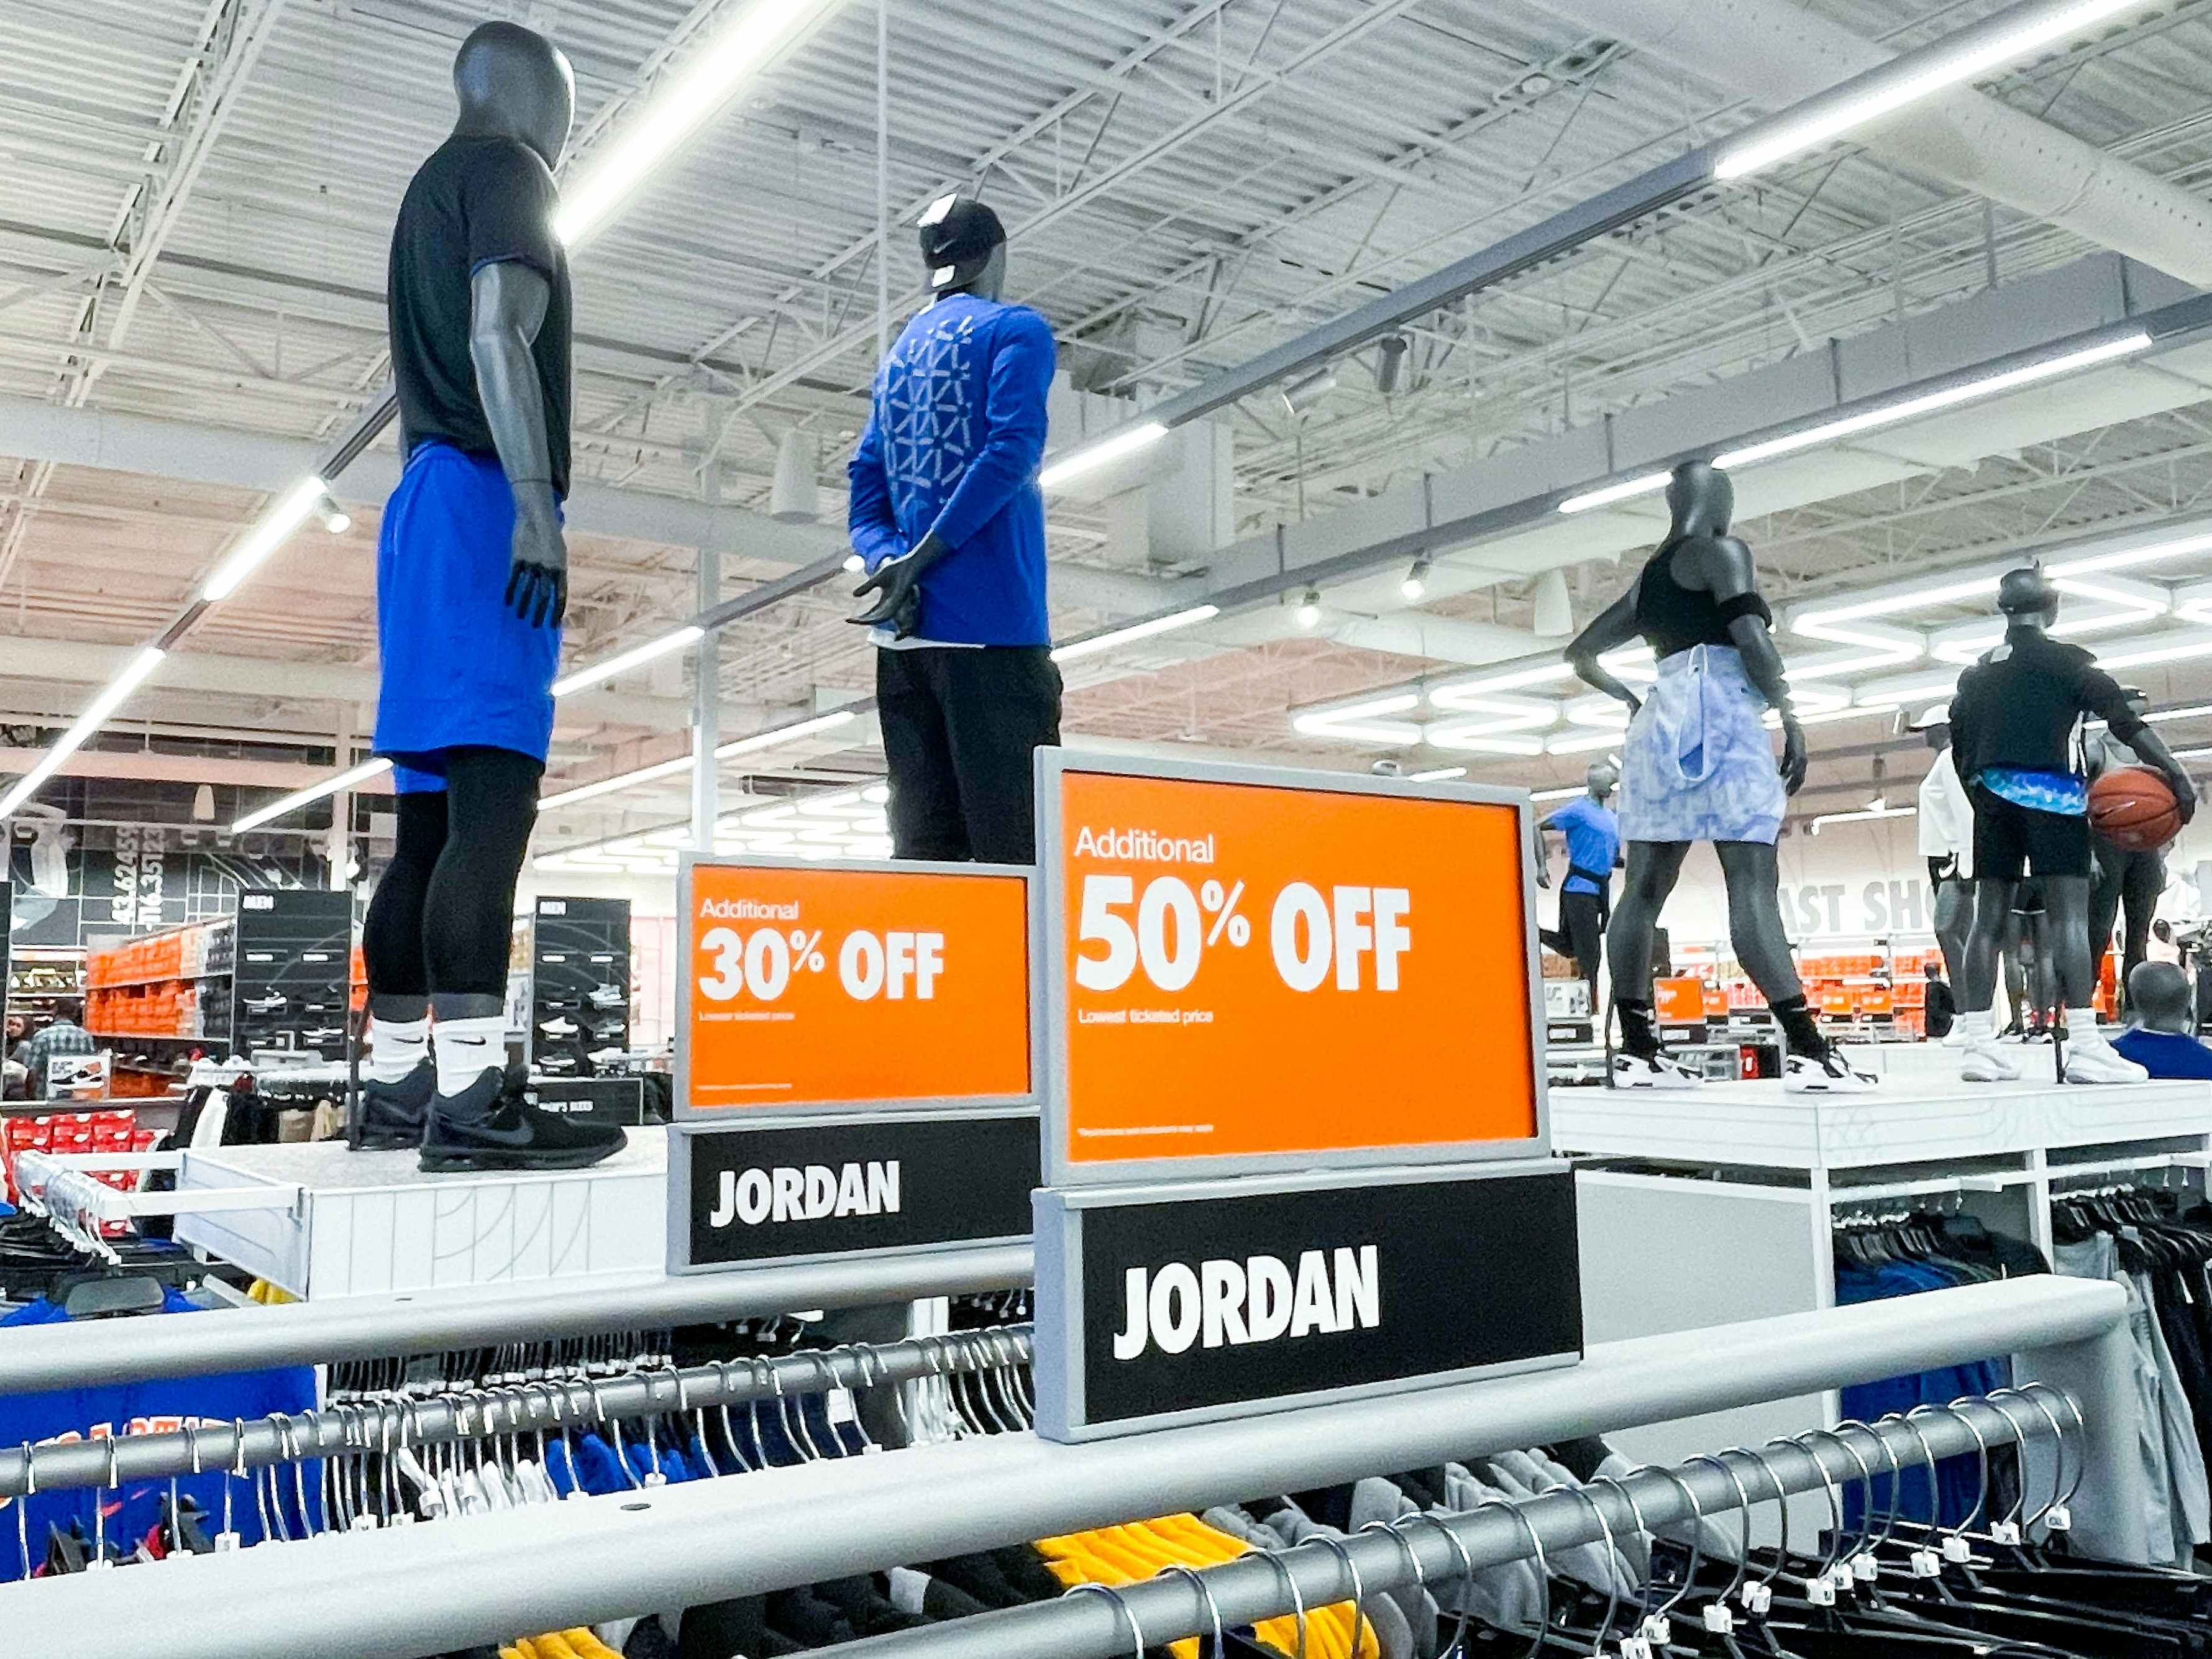 Sale signs affixed to clothing racks of Jordan brand athletic wear in a Nike store